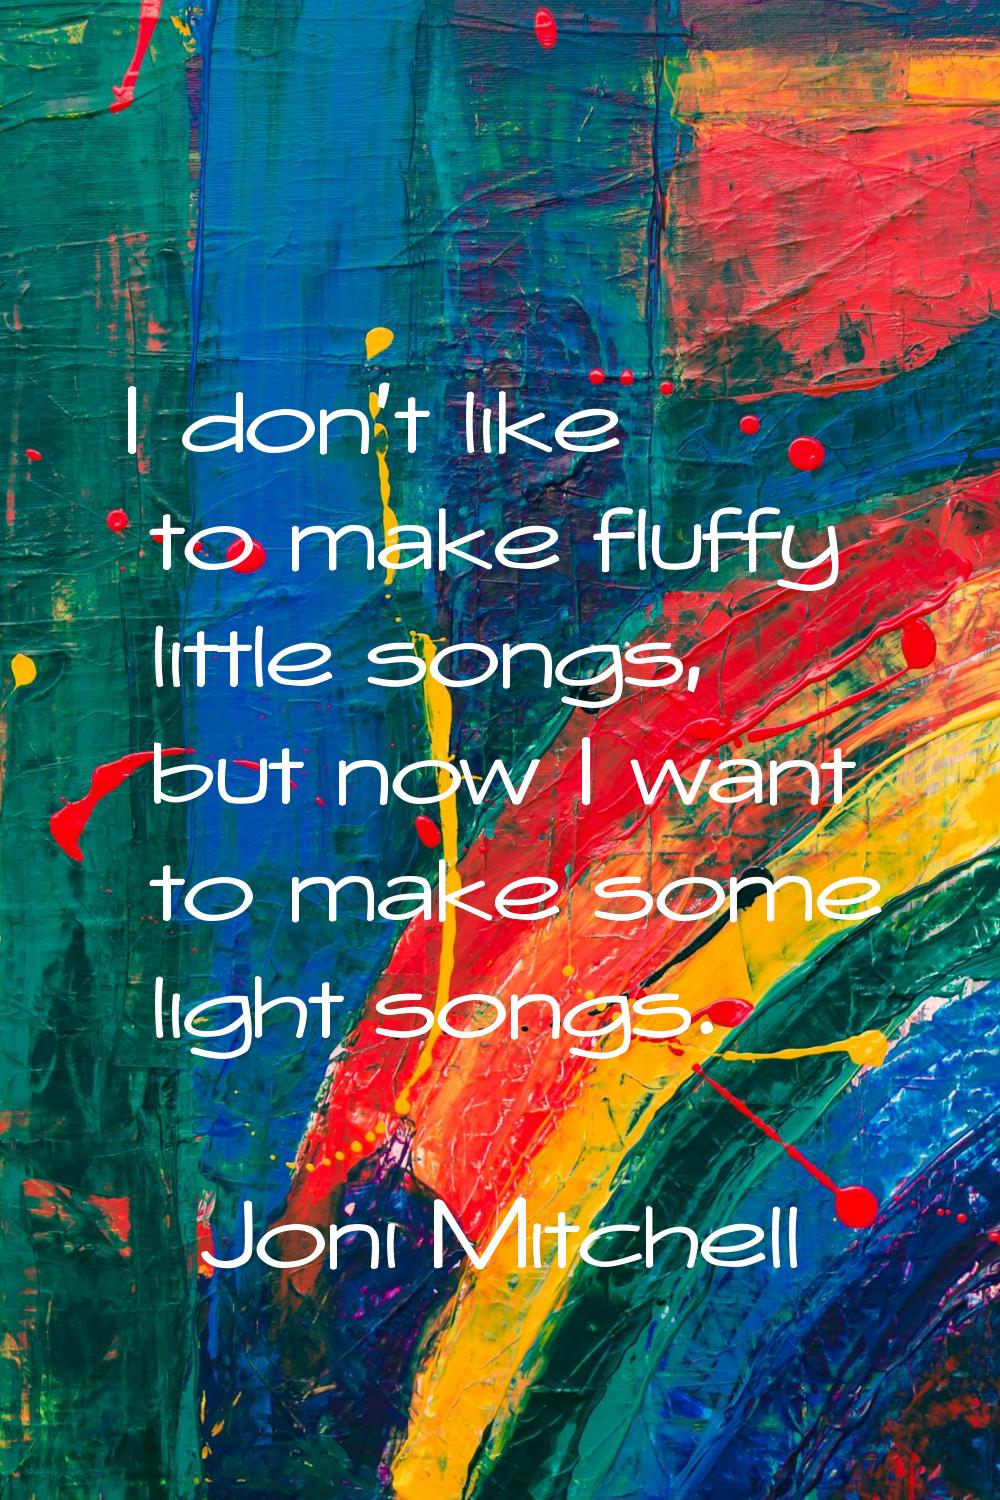 I don't like to make fluffy little songs, but now I want to make some light songs.